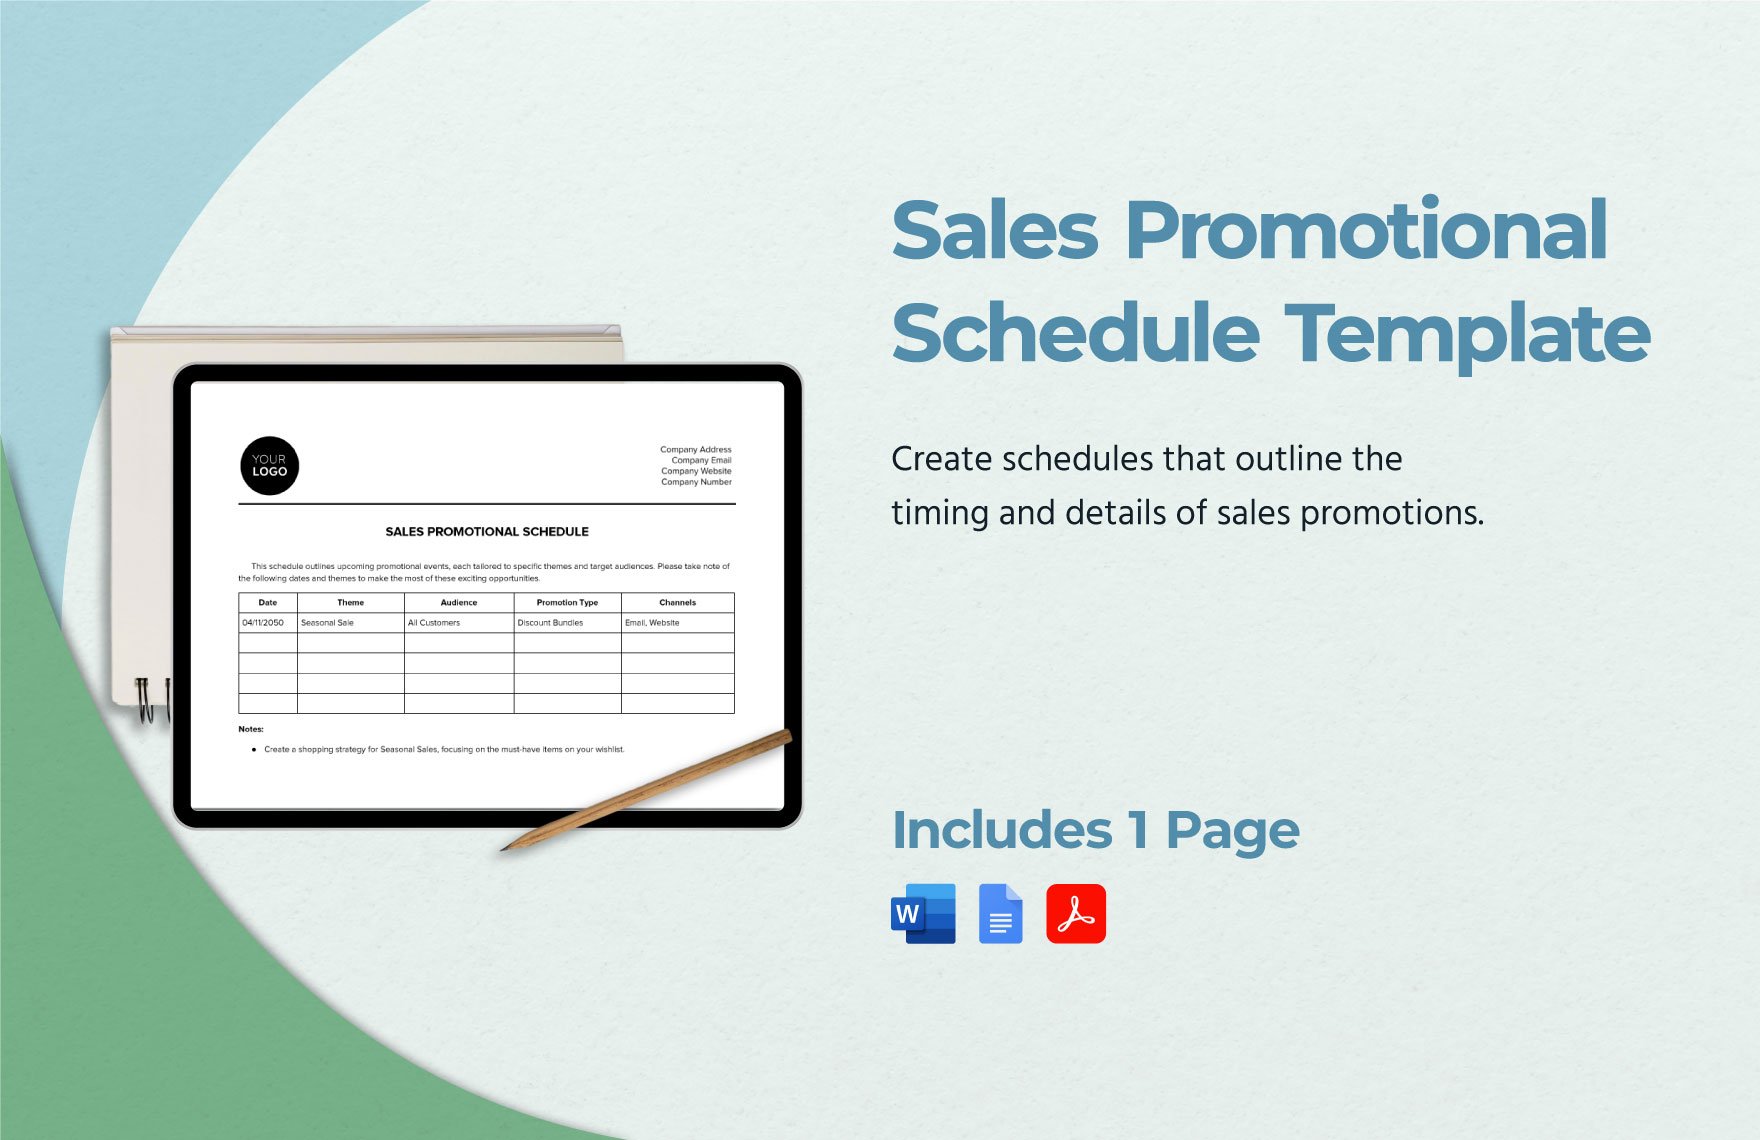 Sales Promotional Schedule Template